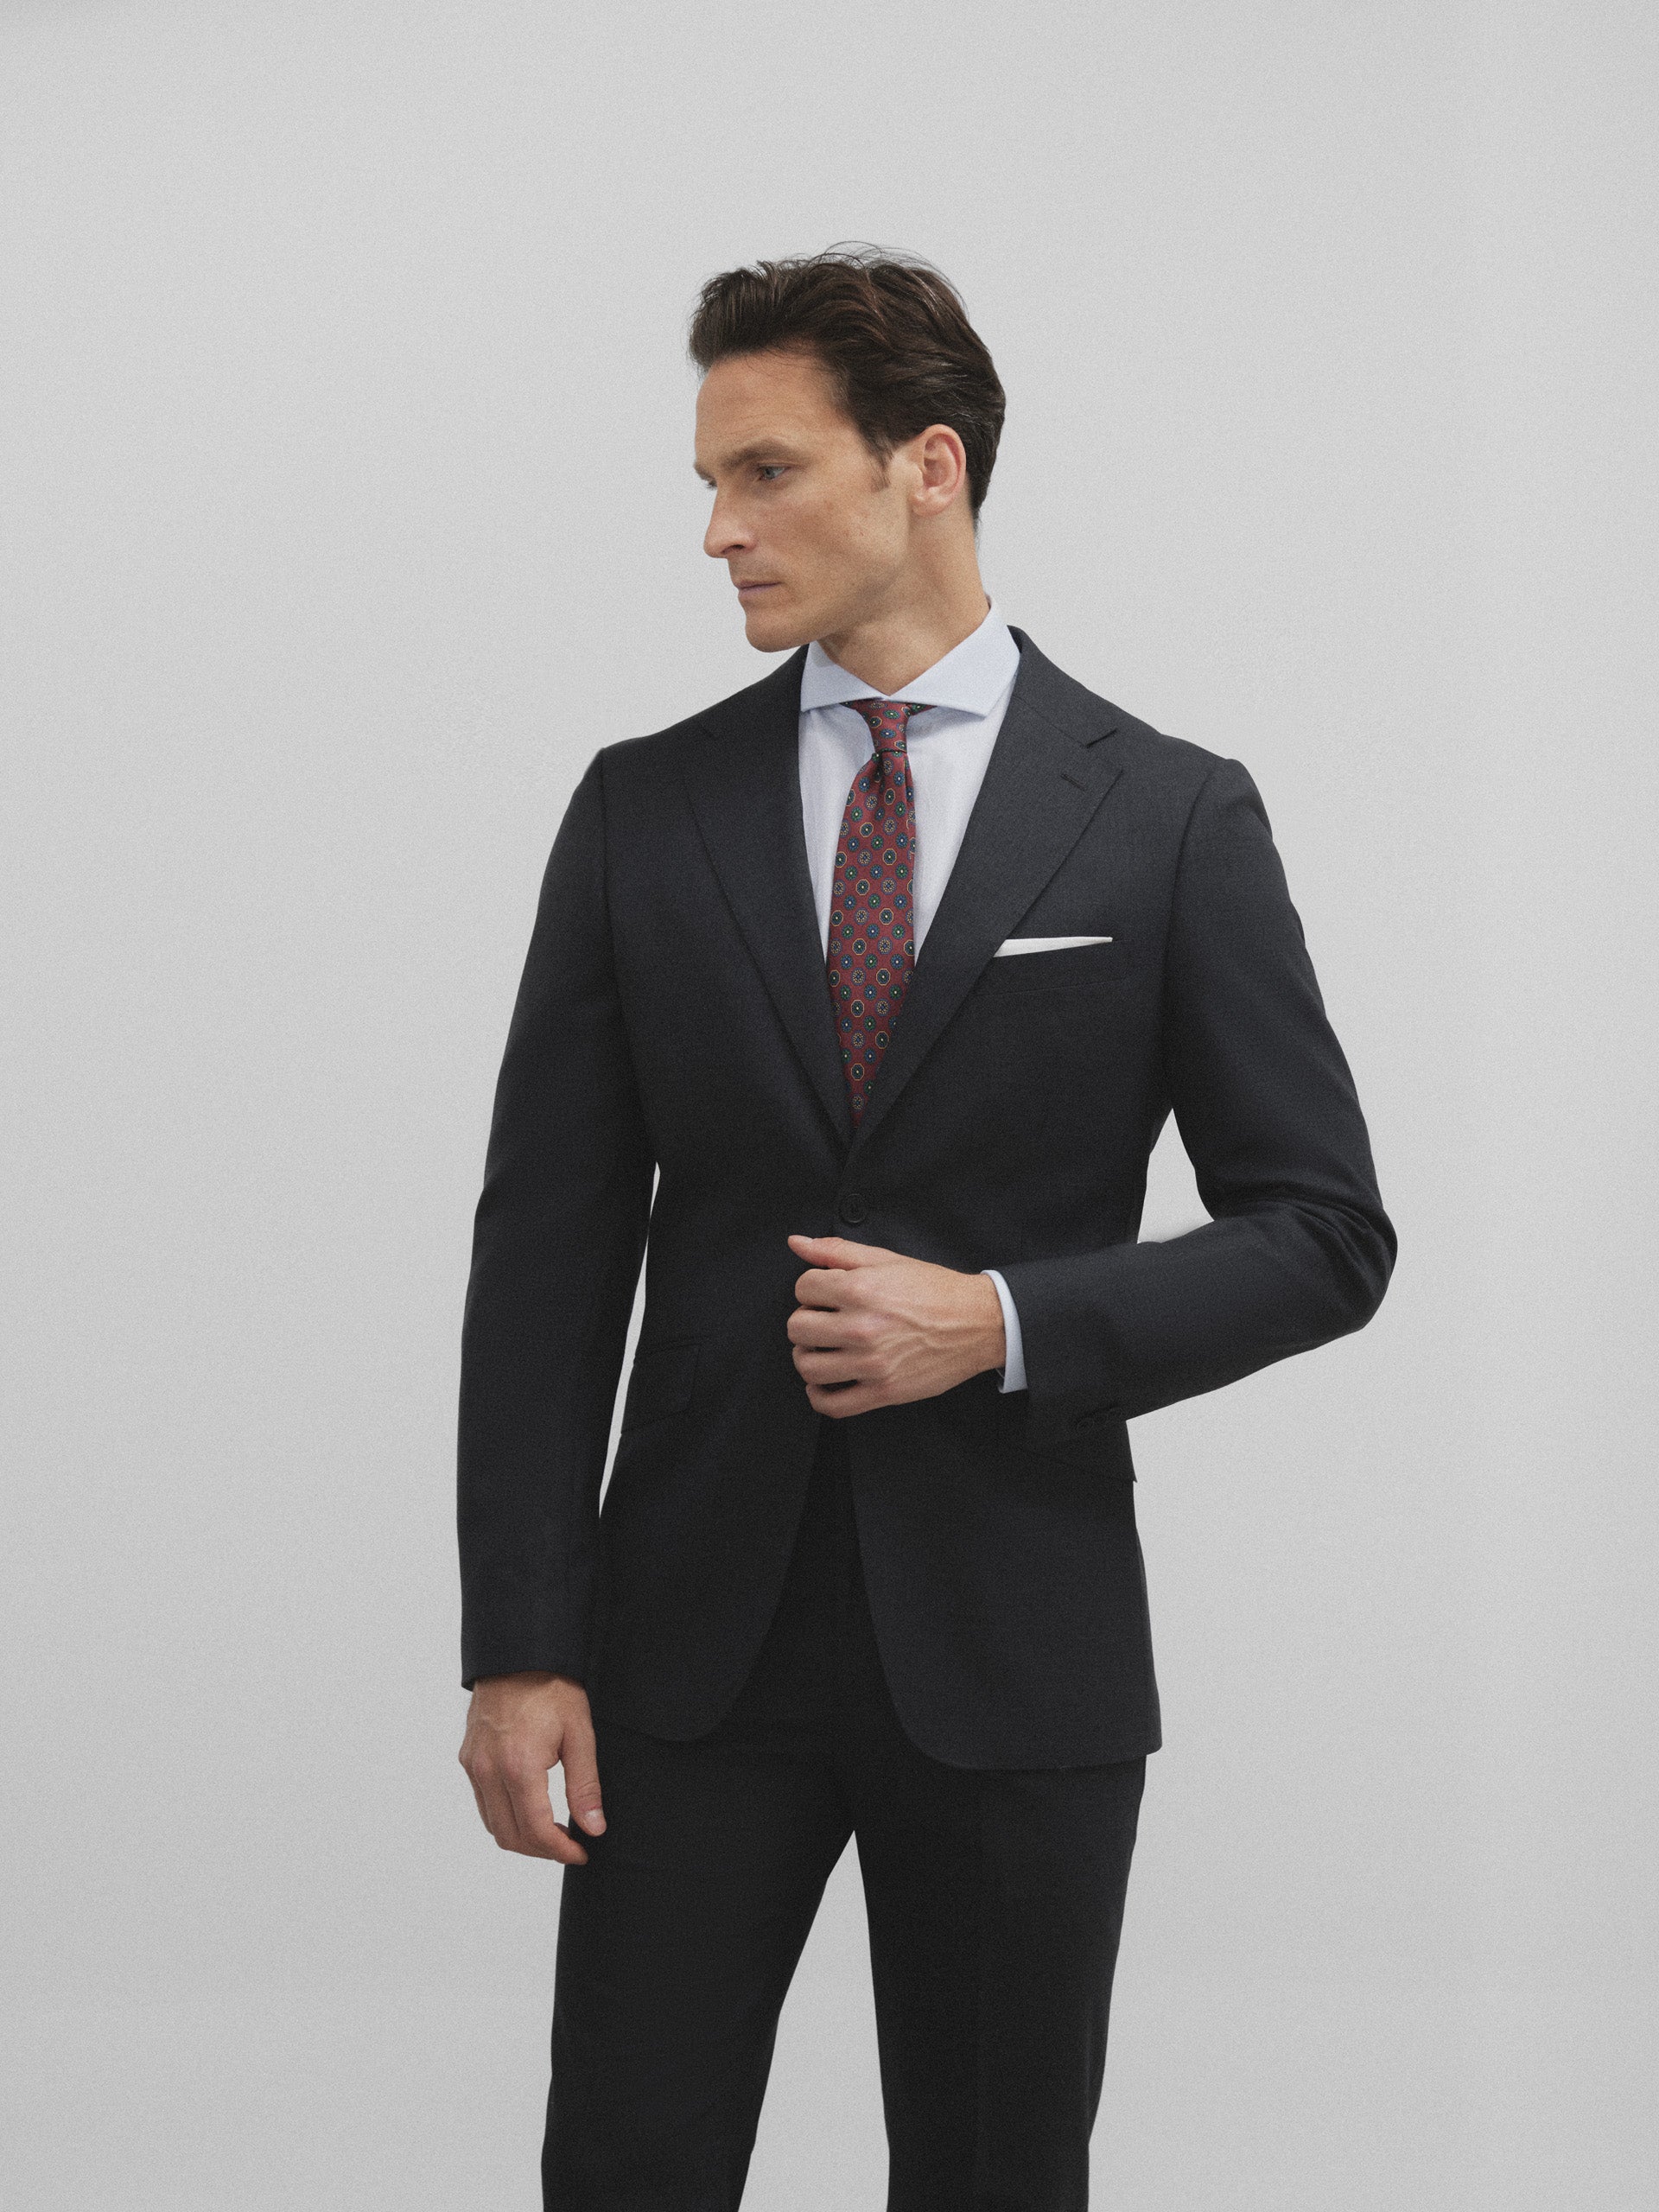 Gray natural stretch suit jacket